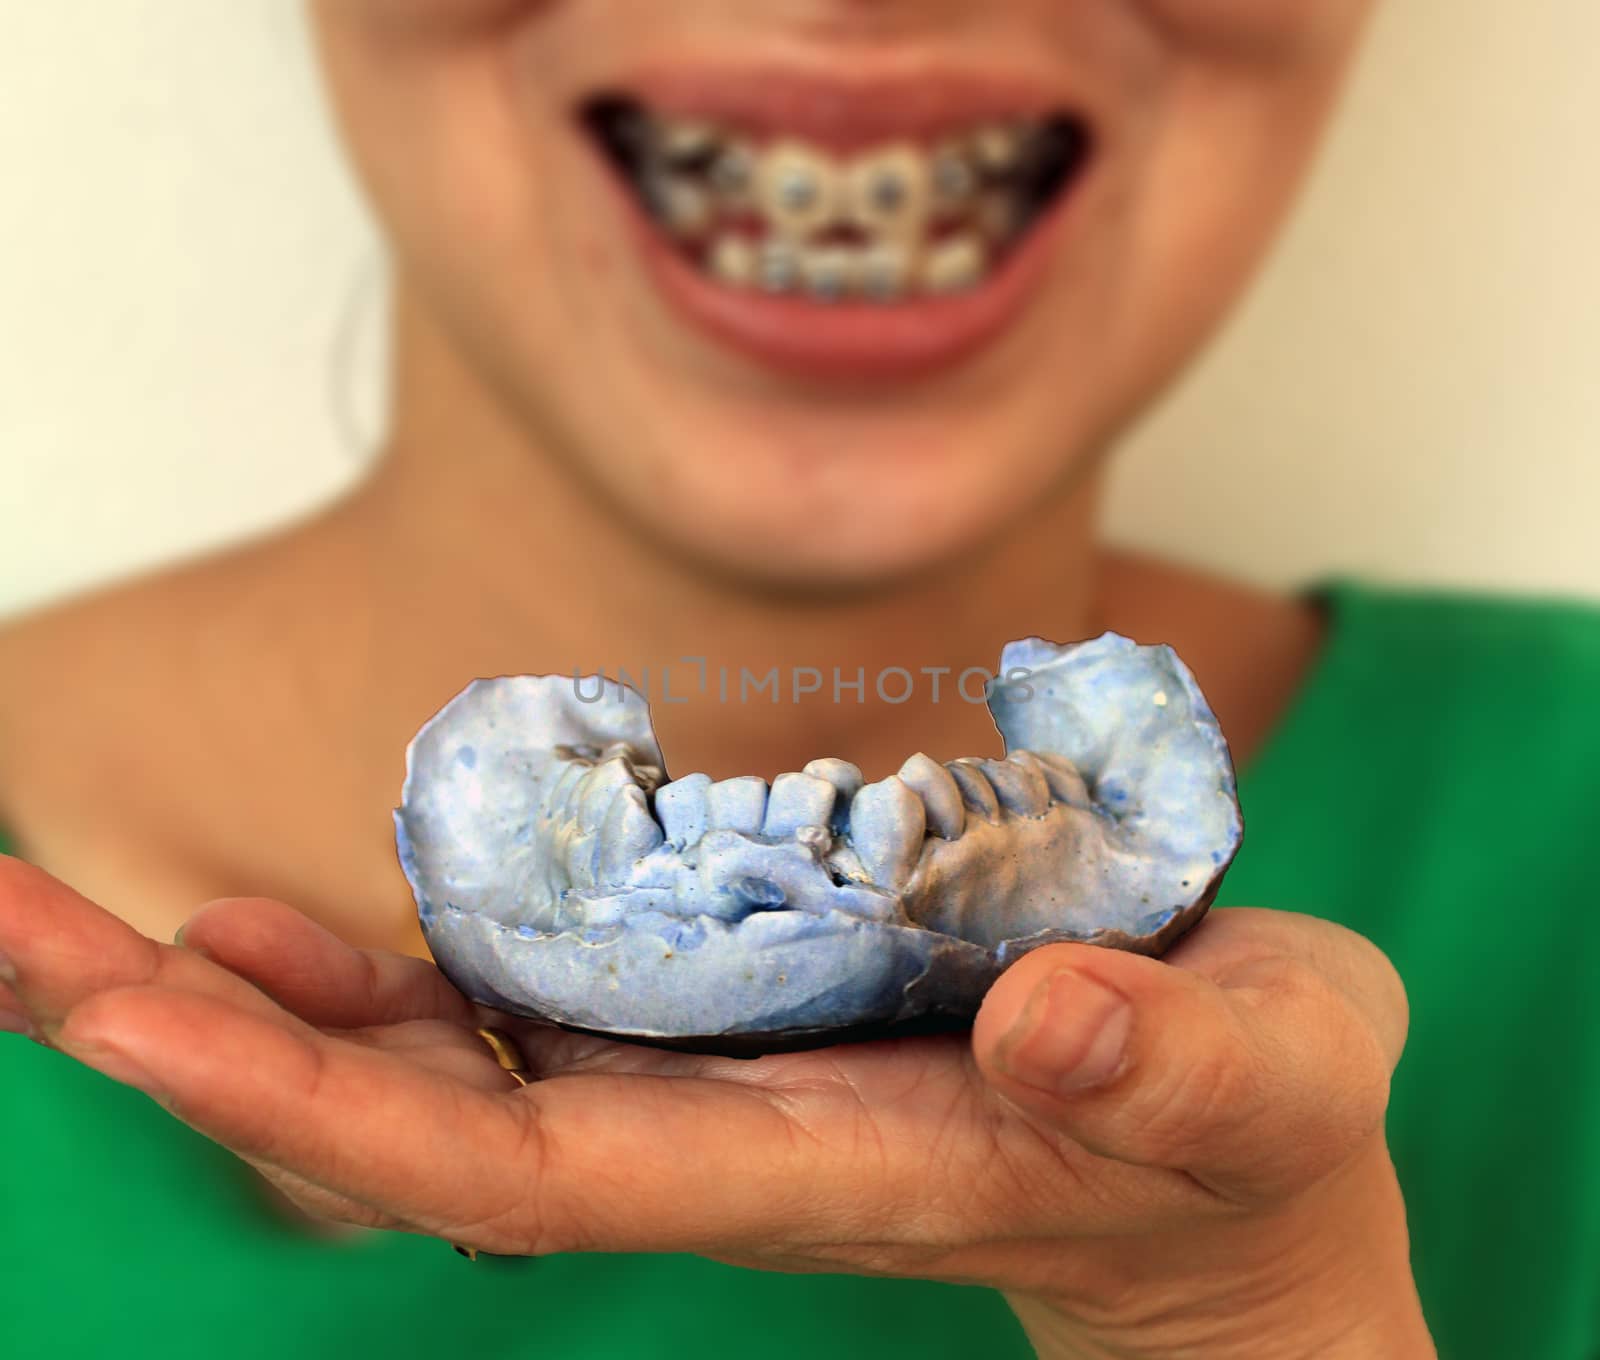 dental arch plaster mold and brace by cupidvoice